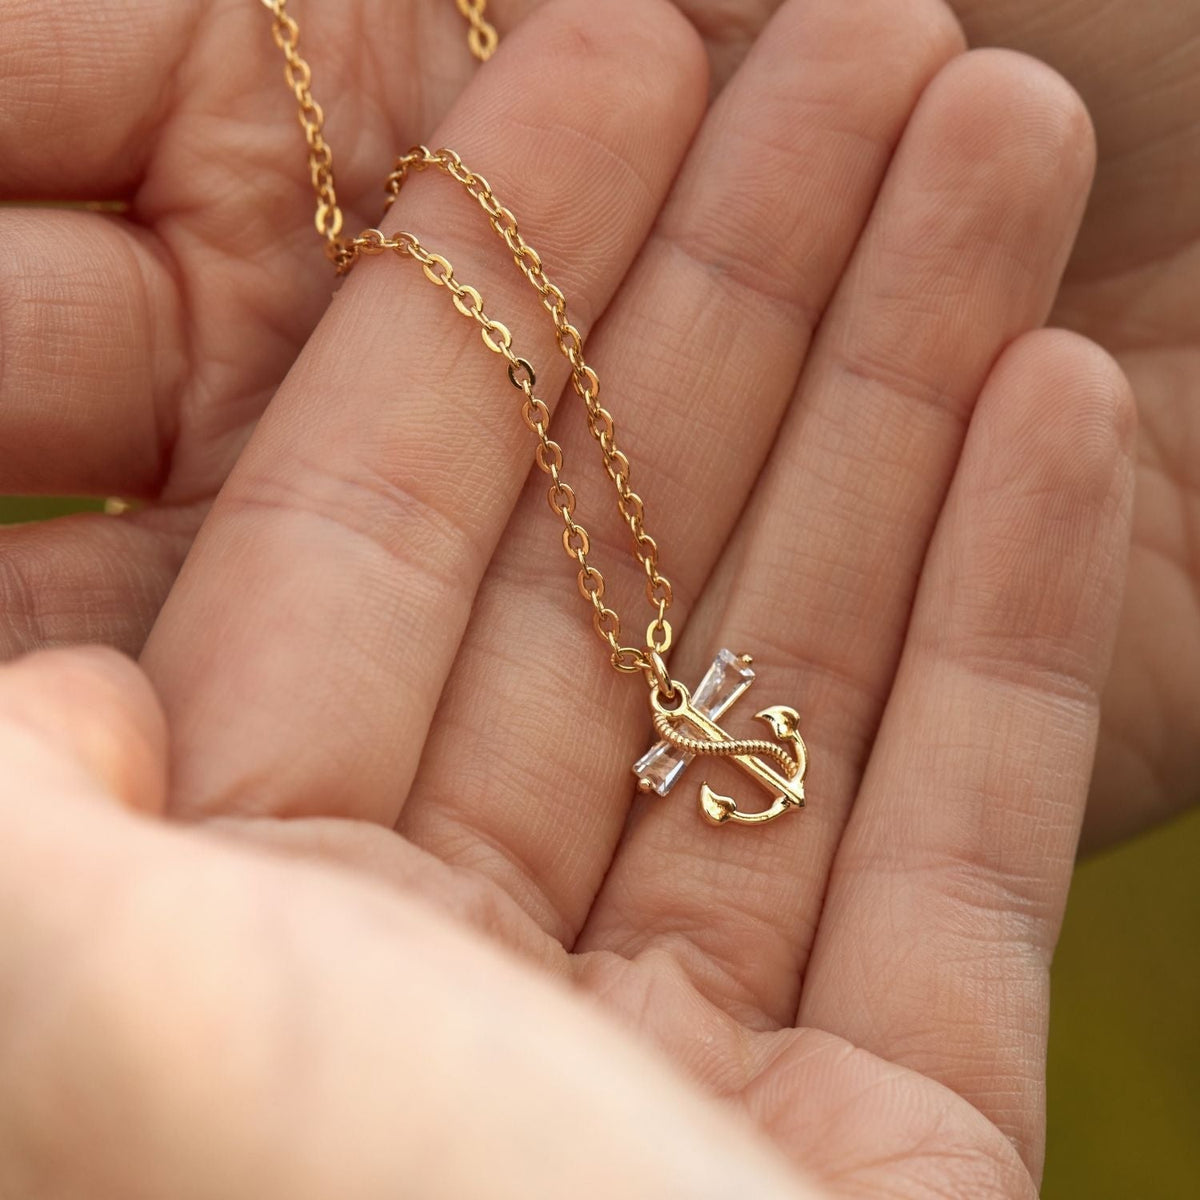 To My Wife | Turn Back the Clock | Anchor Necklace